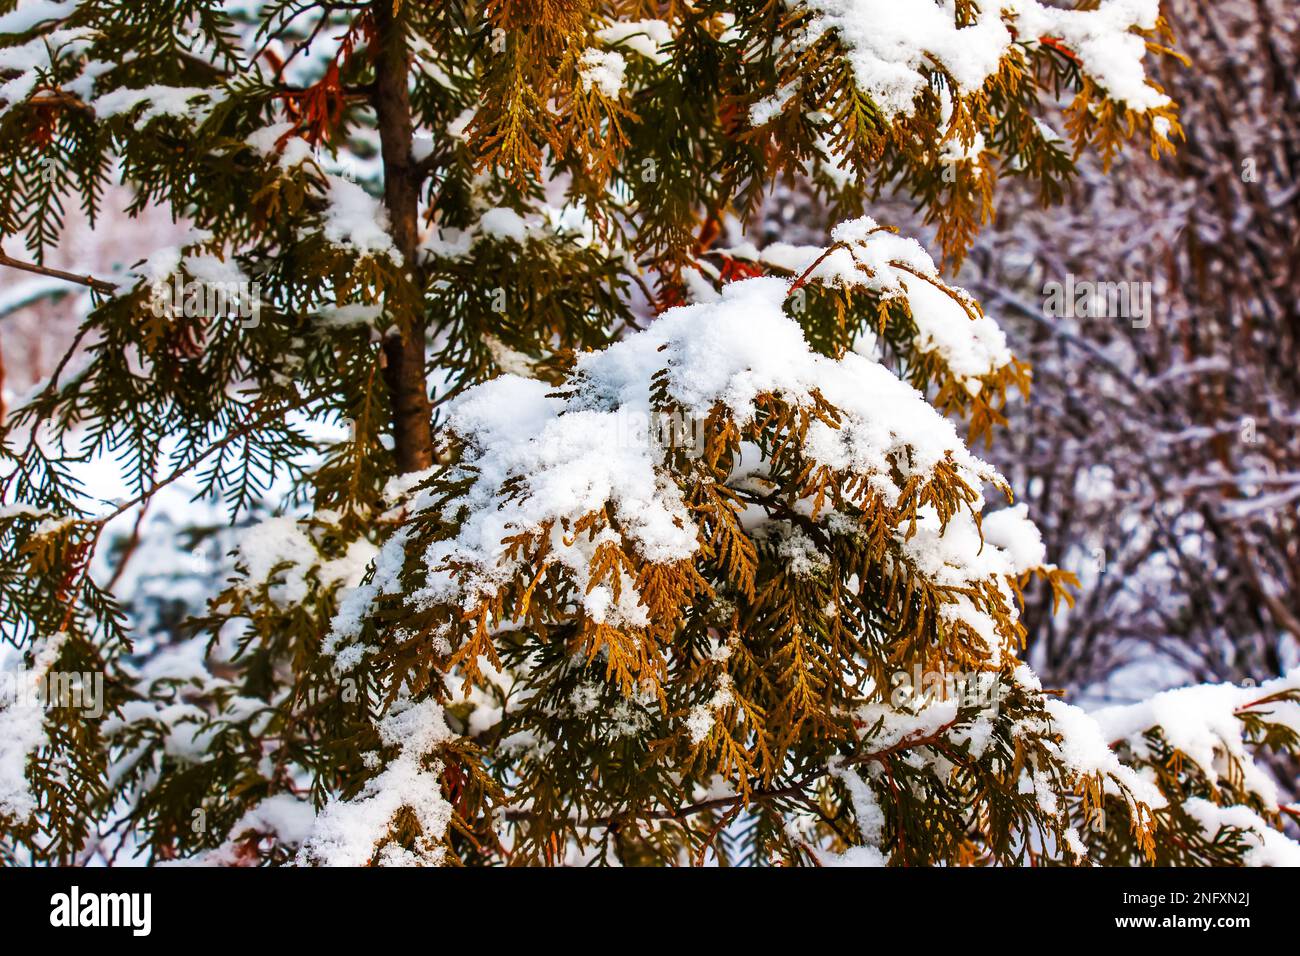 Thuja standishii CAR in the snow. Winter, green thuja bushes covered with white snow Stock Photo